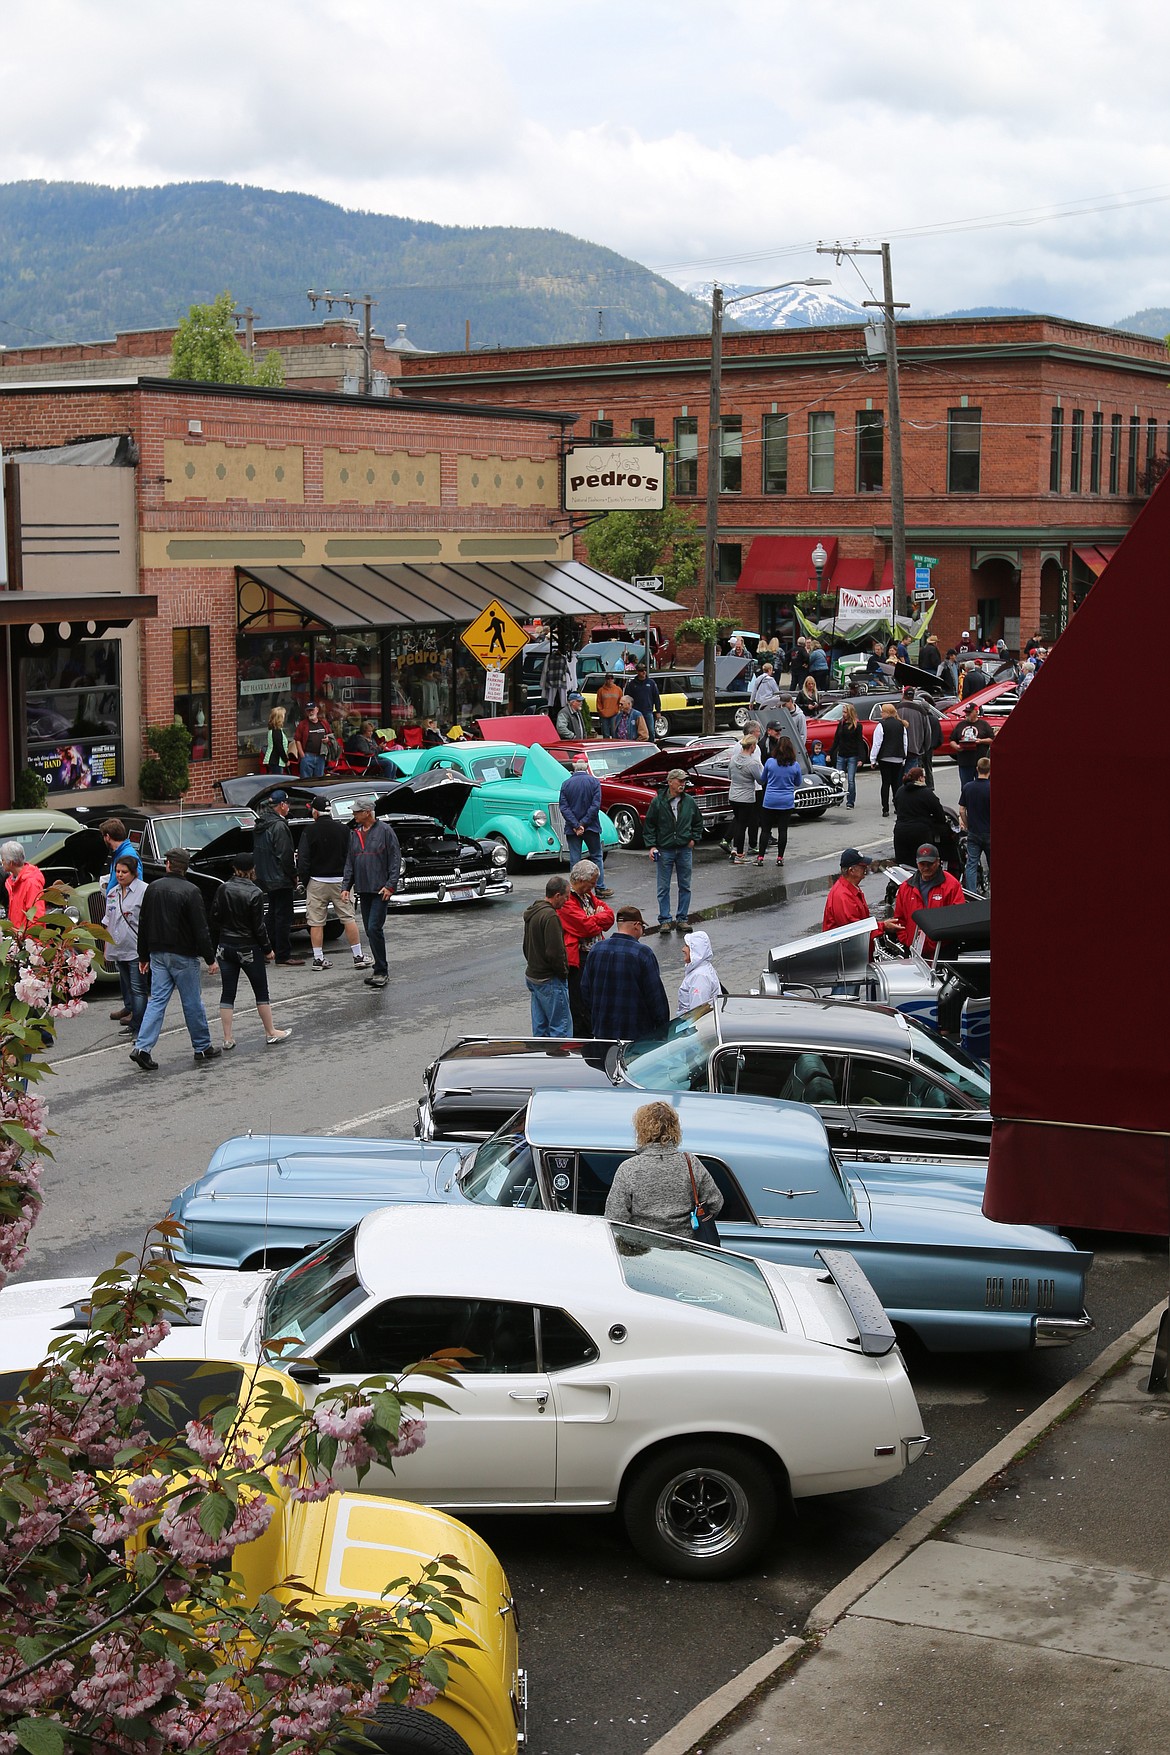 (Daily Bee file photo/CAROLINE LOBSINGER)
Fans of classic cars and great music turn out to enjoy both at the annual Lost in the &#145;50s car show. The annual celebration, which also includes a car parade, two concerts with legendary artists from the era and more, begins Thursday.